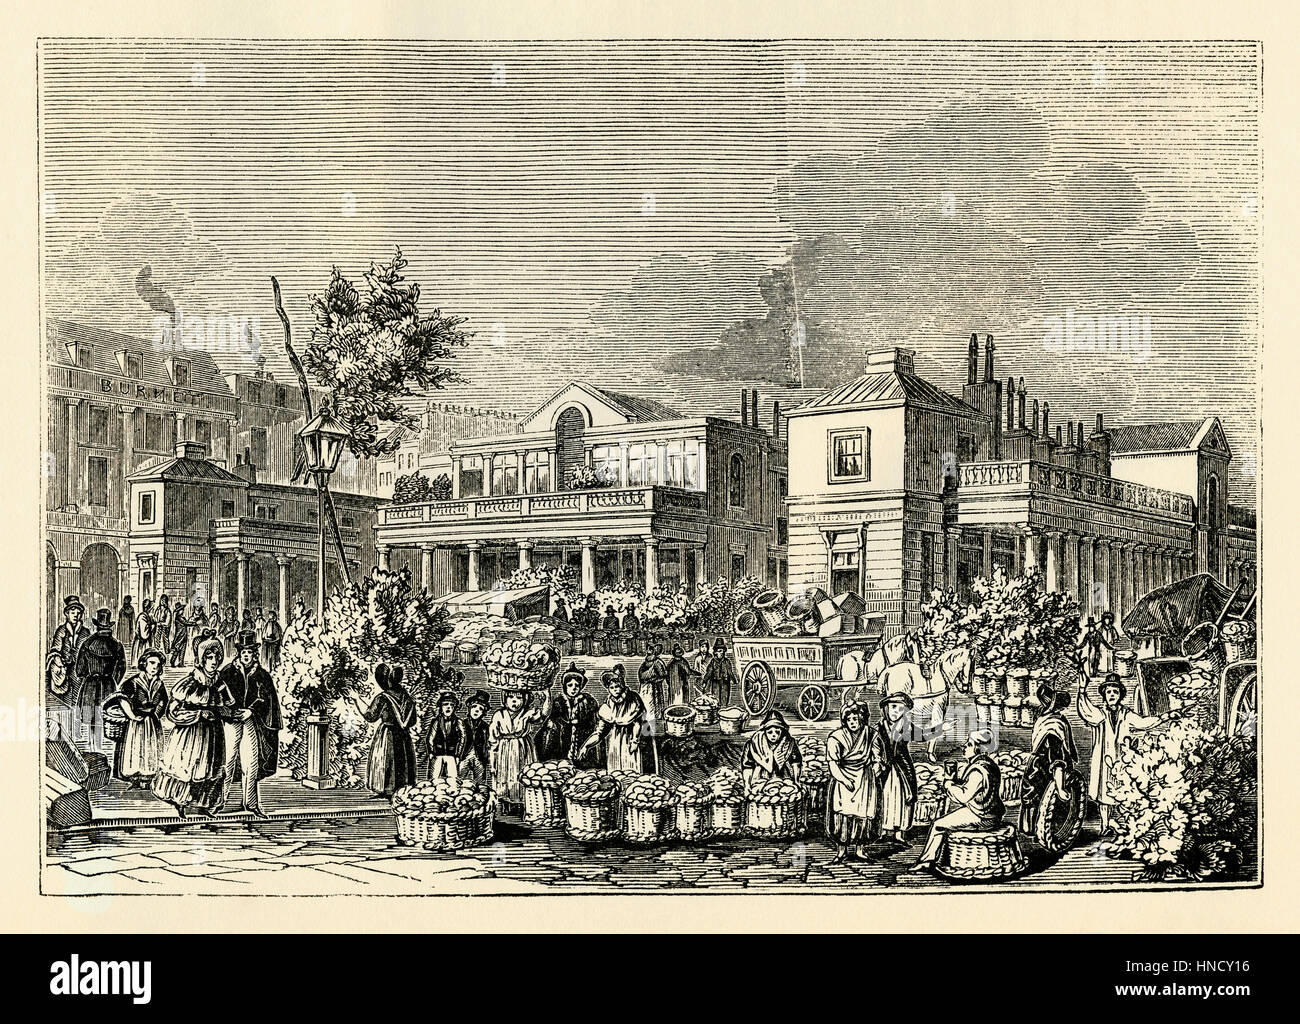 The fruit-and-vegetable market in the central square of Covent Garden, London – an old engraving c. 1840 Stock Photo